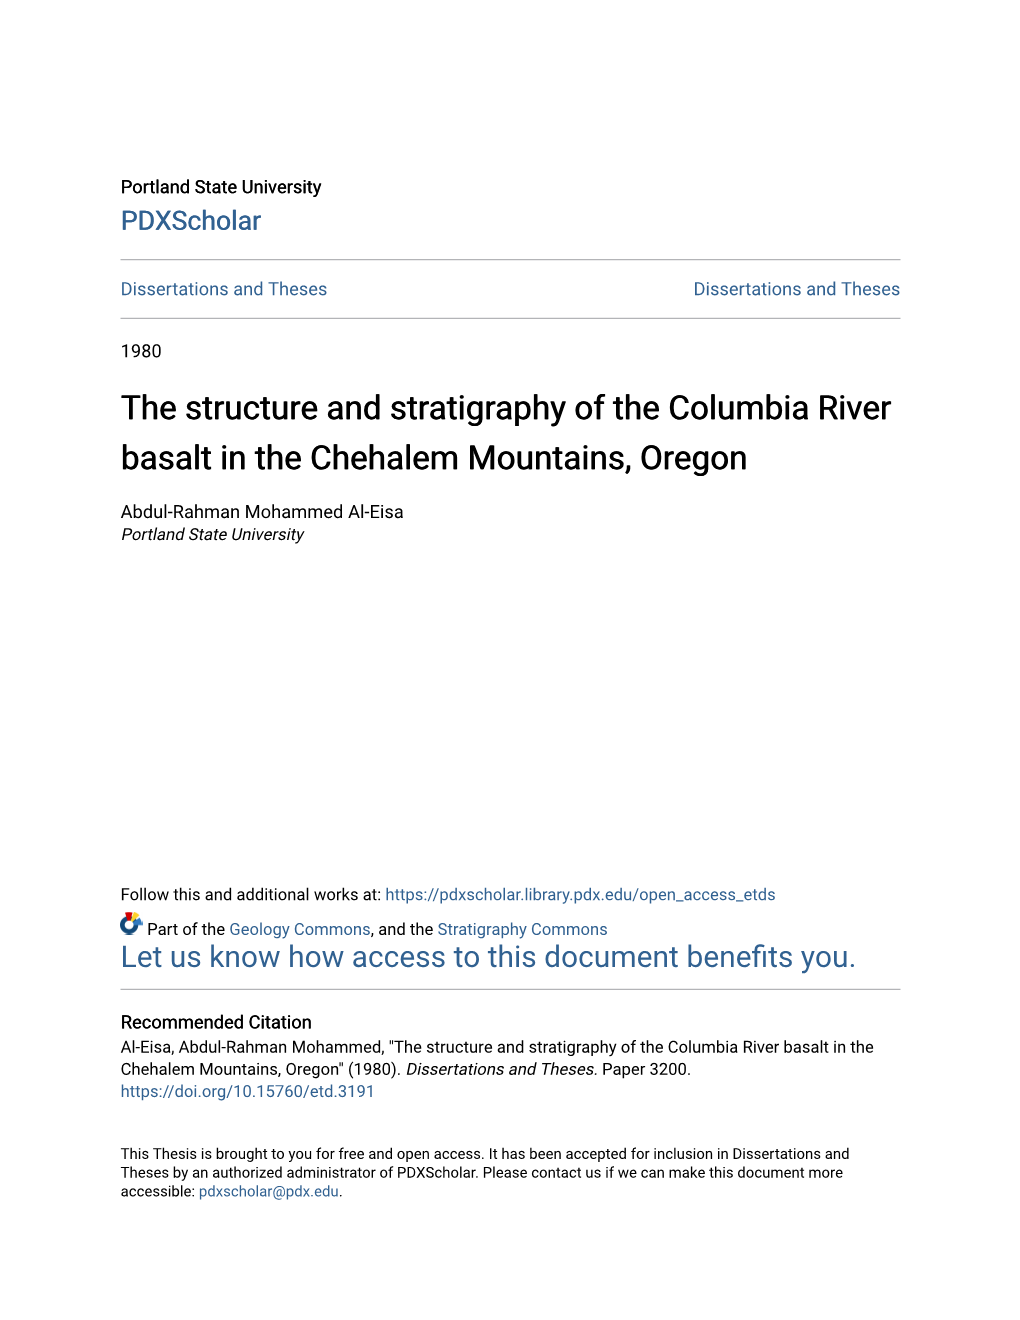 The Structure and Stratigraphy of the Columbia River Basalt in the Chehalem Mountains, Oregon